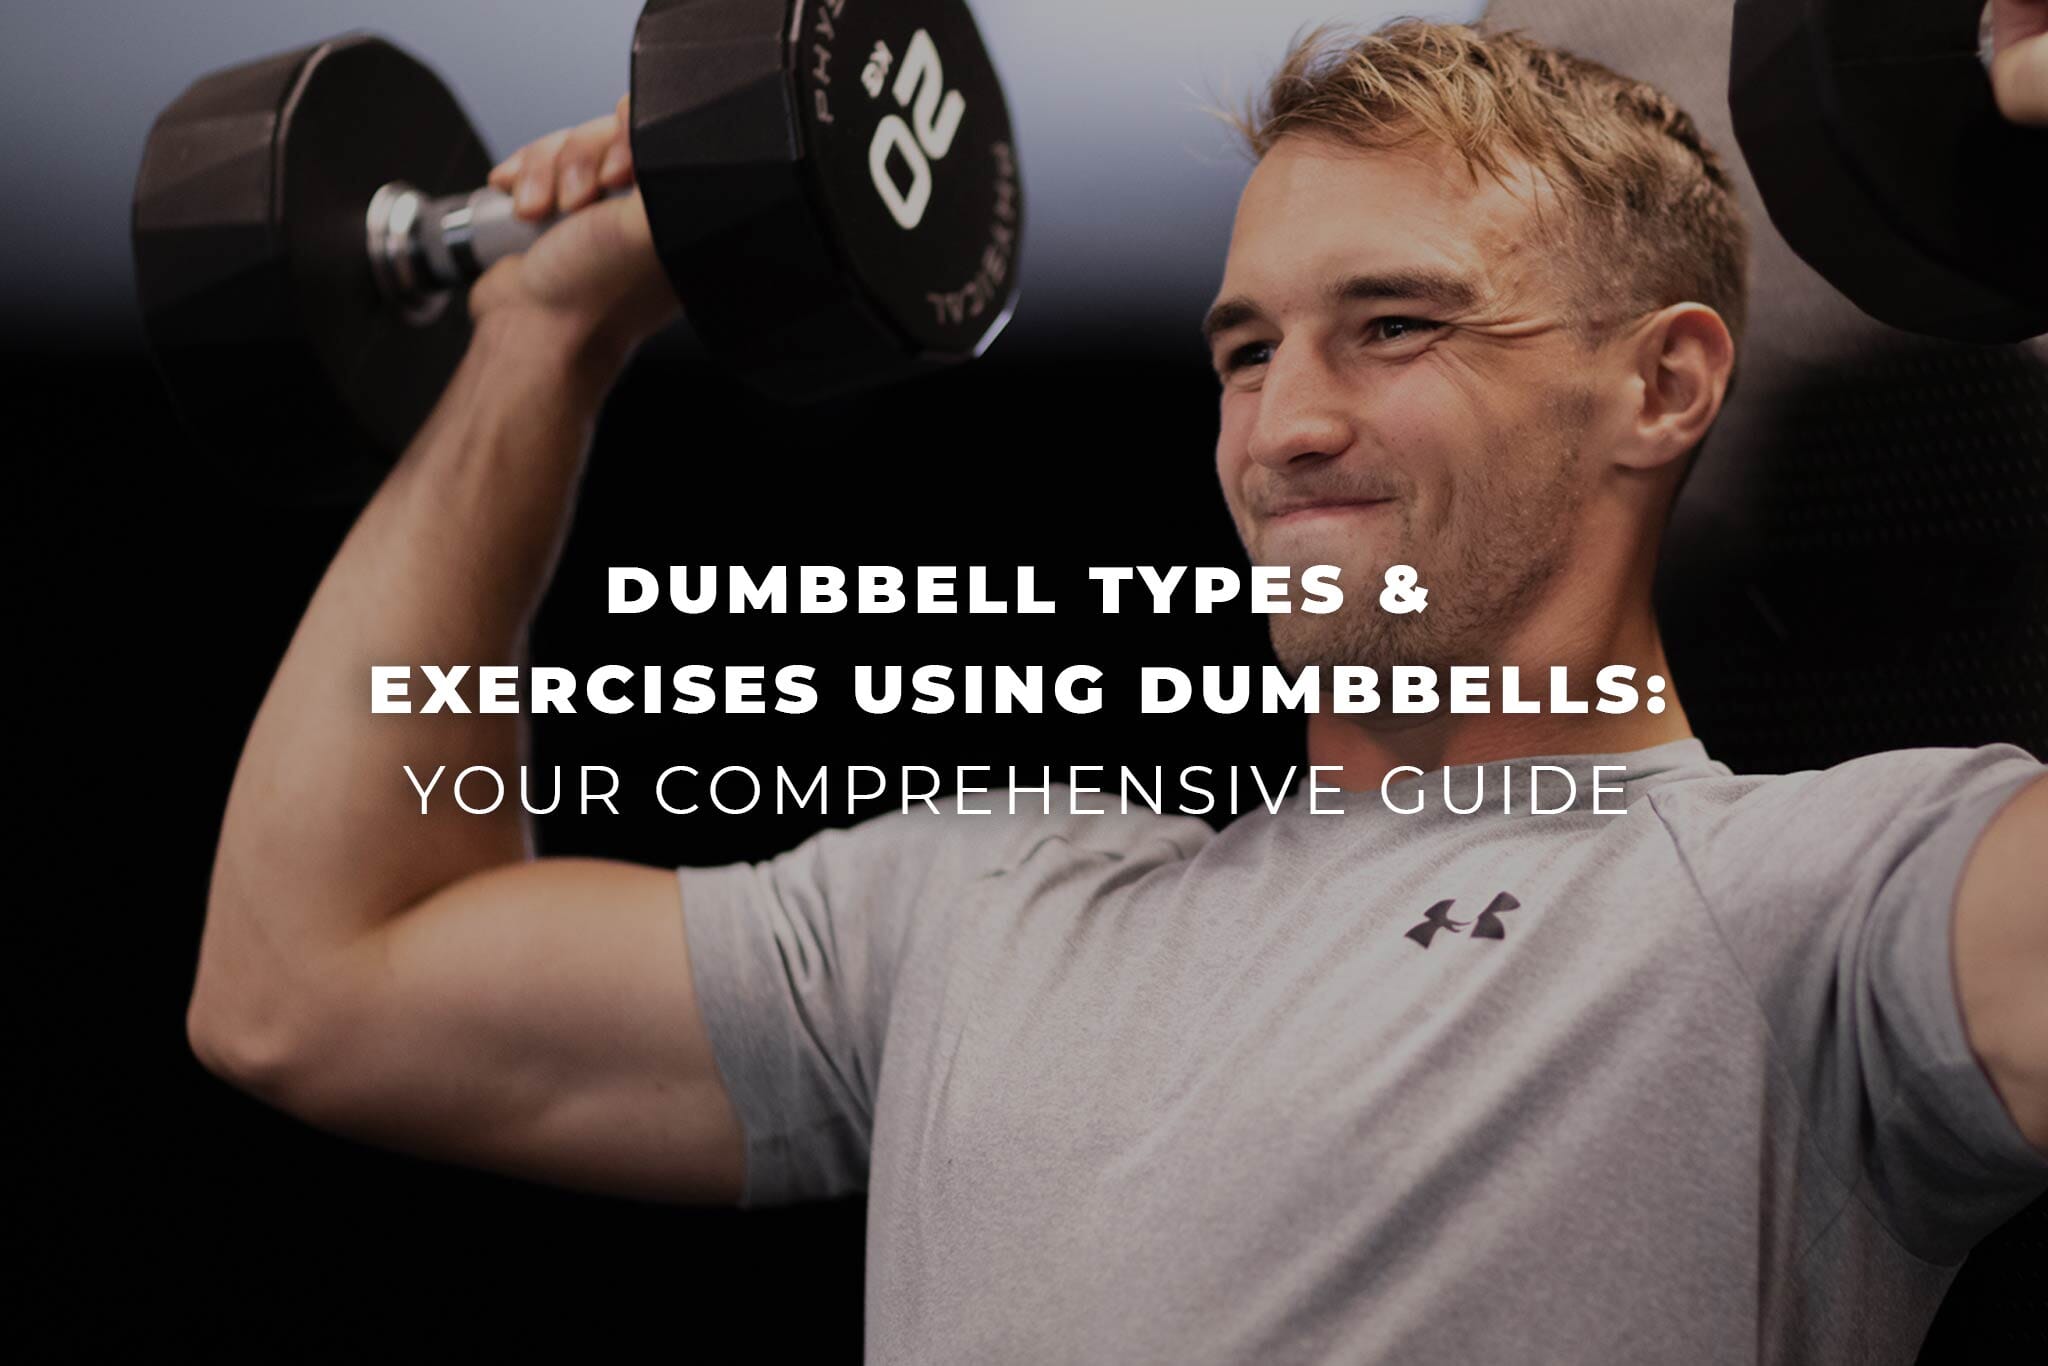 Dumbbell Tricep Kickback - A Complete Guide to Tone & Define the Triceps